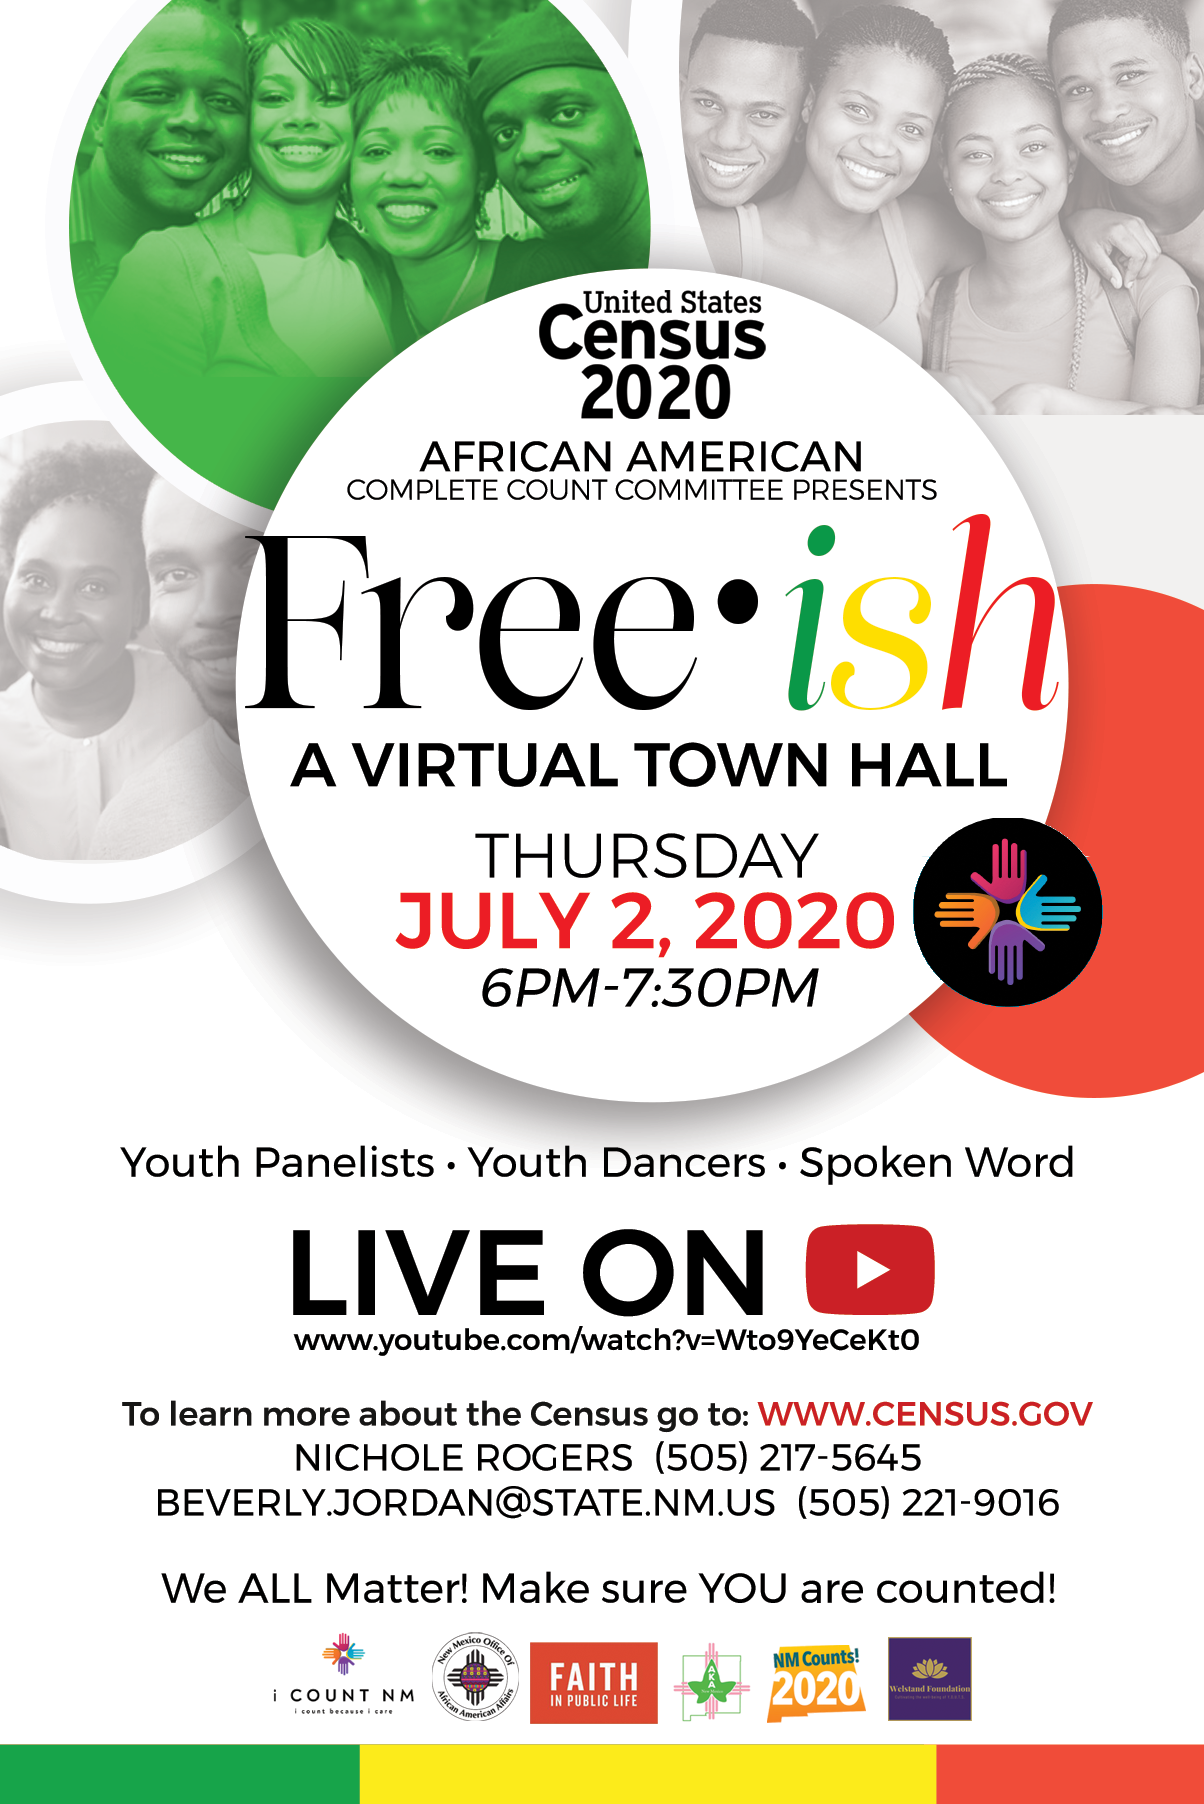 Free-ish Youth Statewide Census Town Hall [article image]